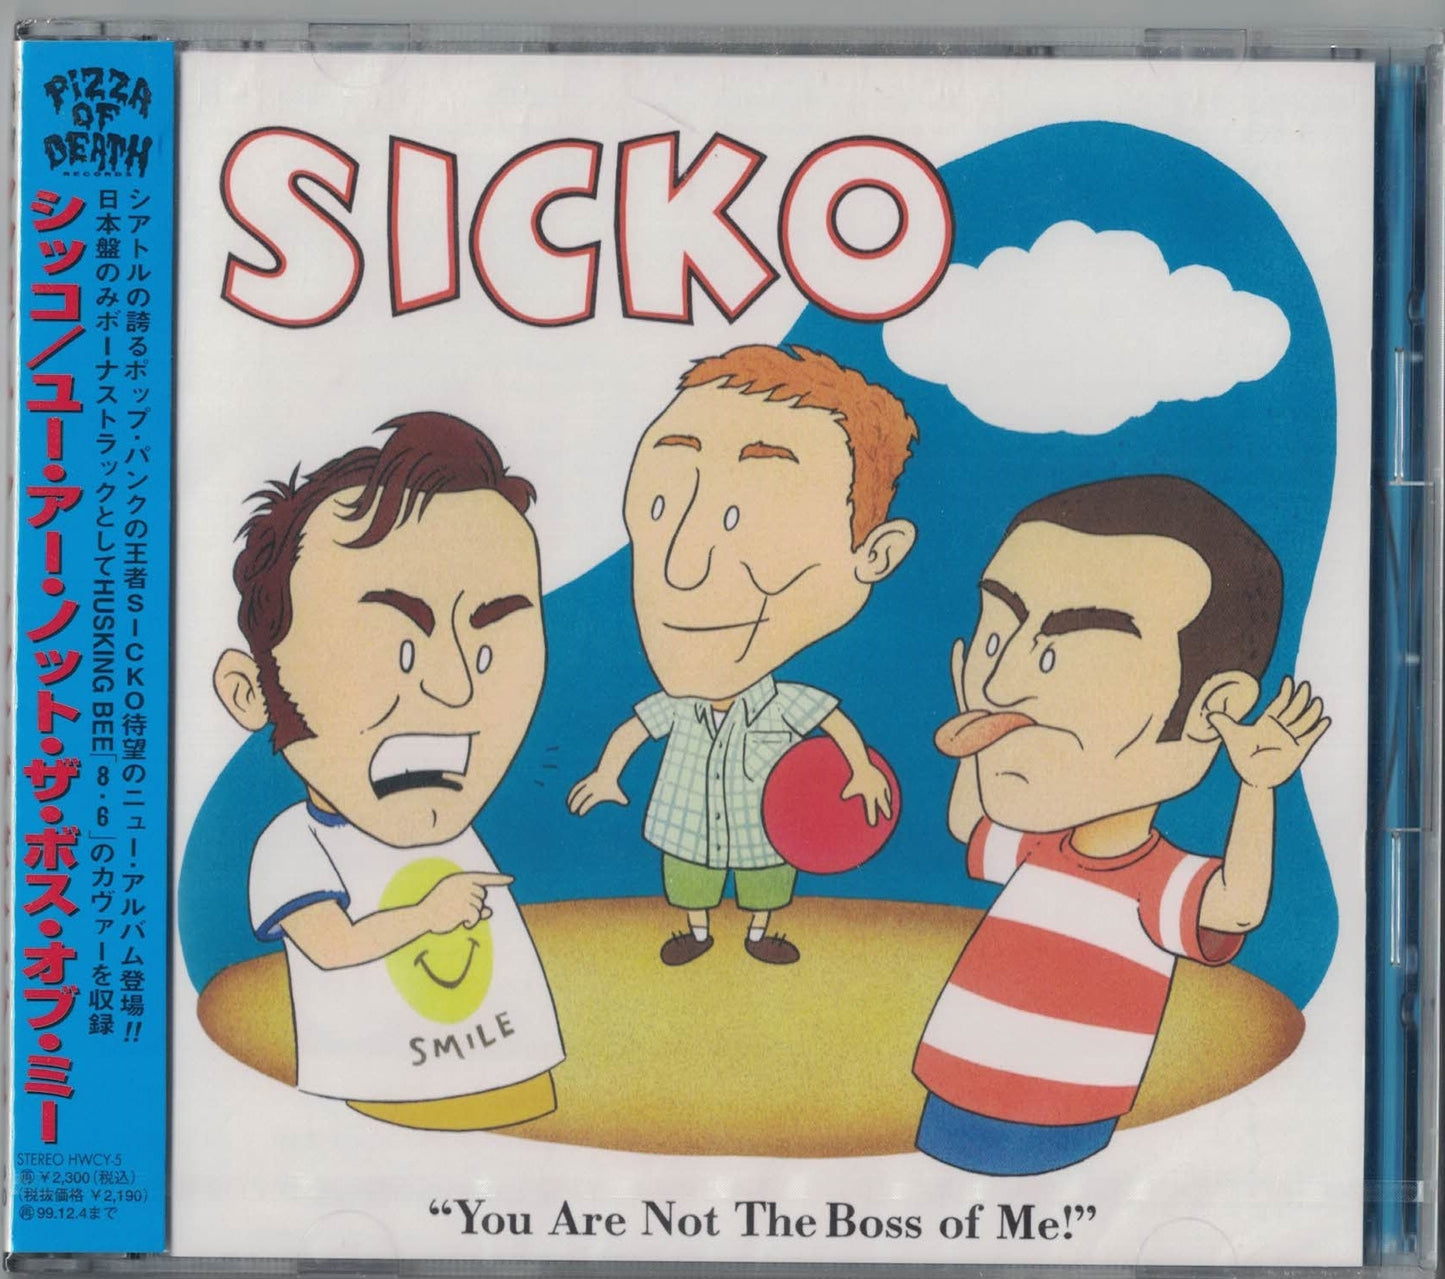 You Are Not the Boss of Me CD - Sicko